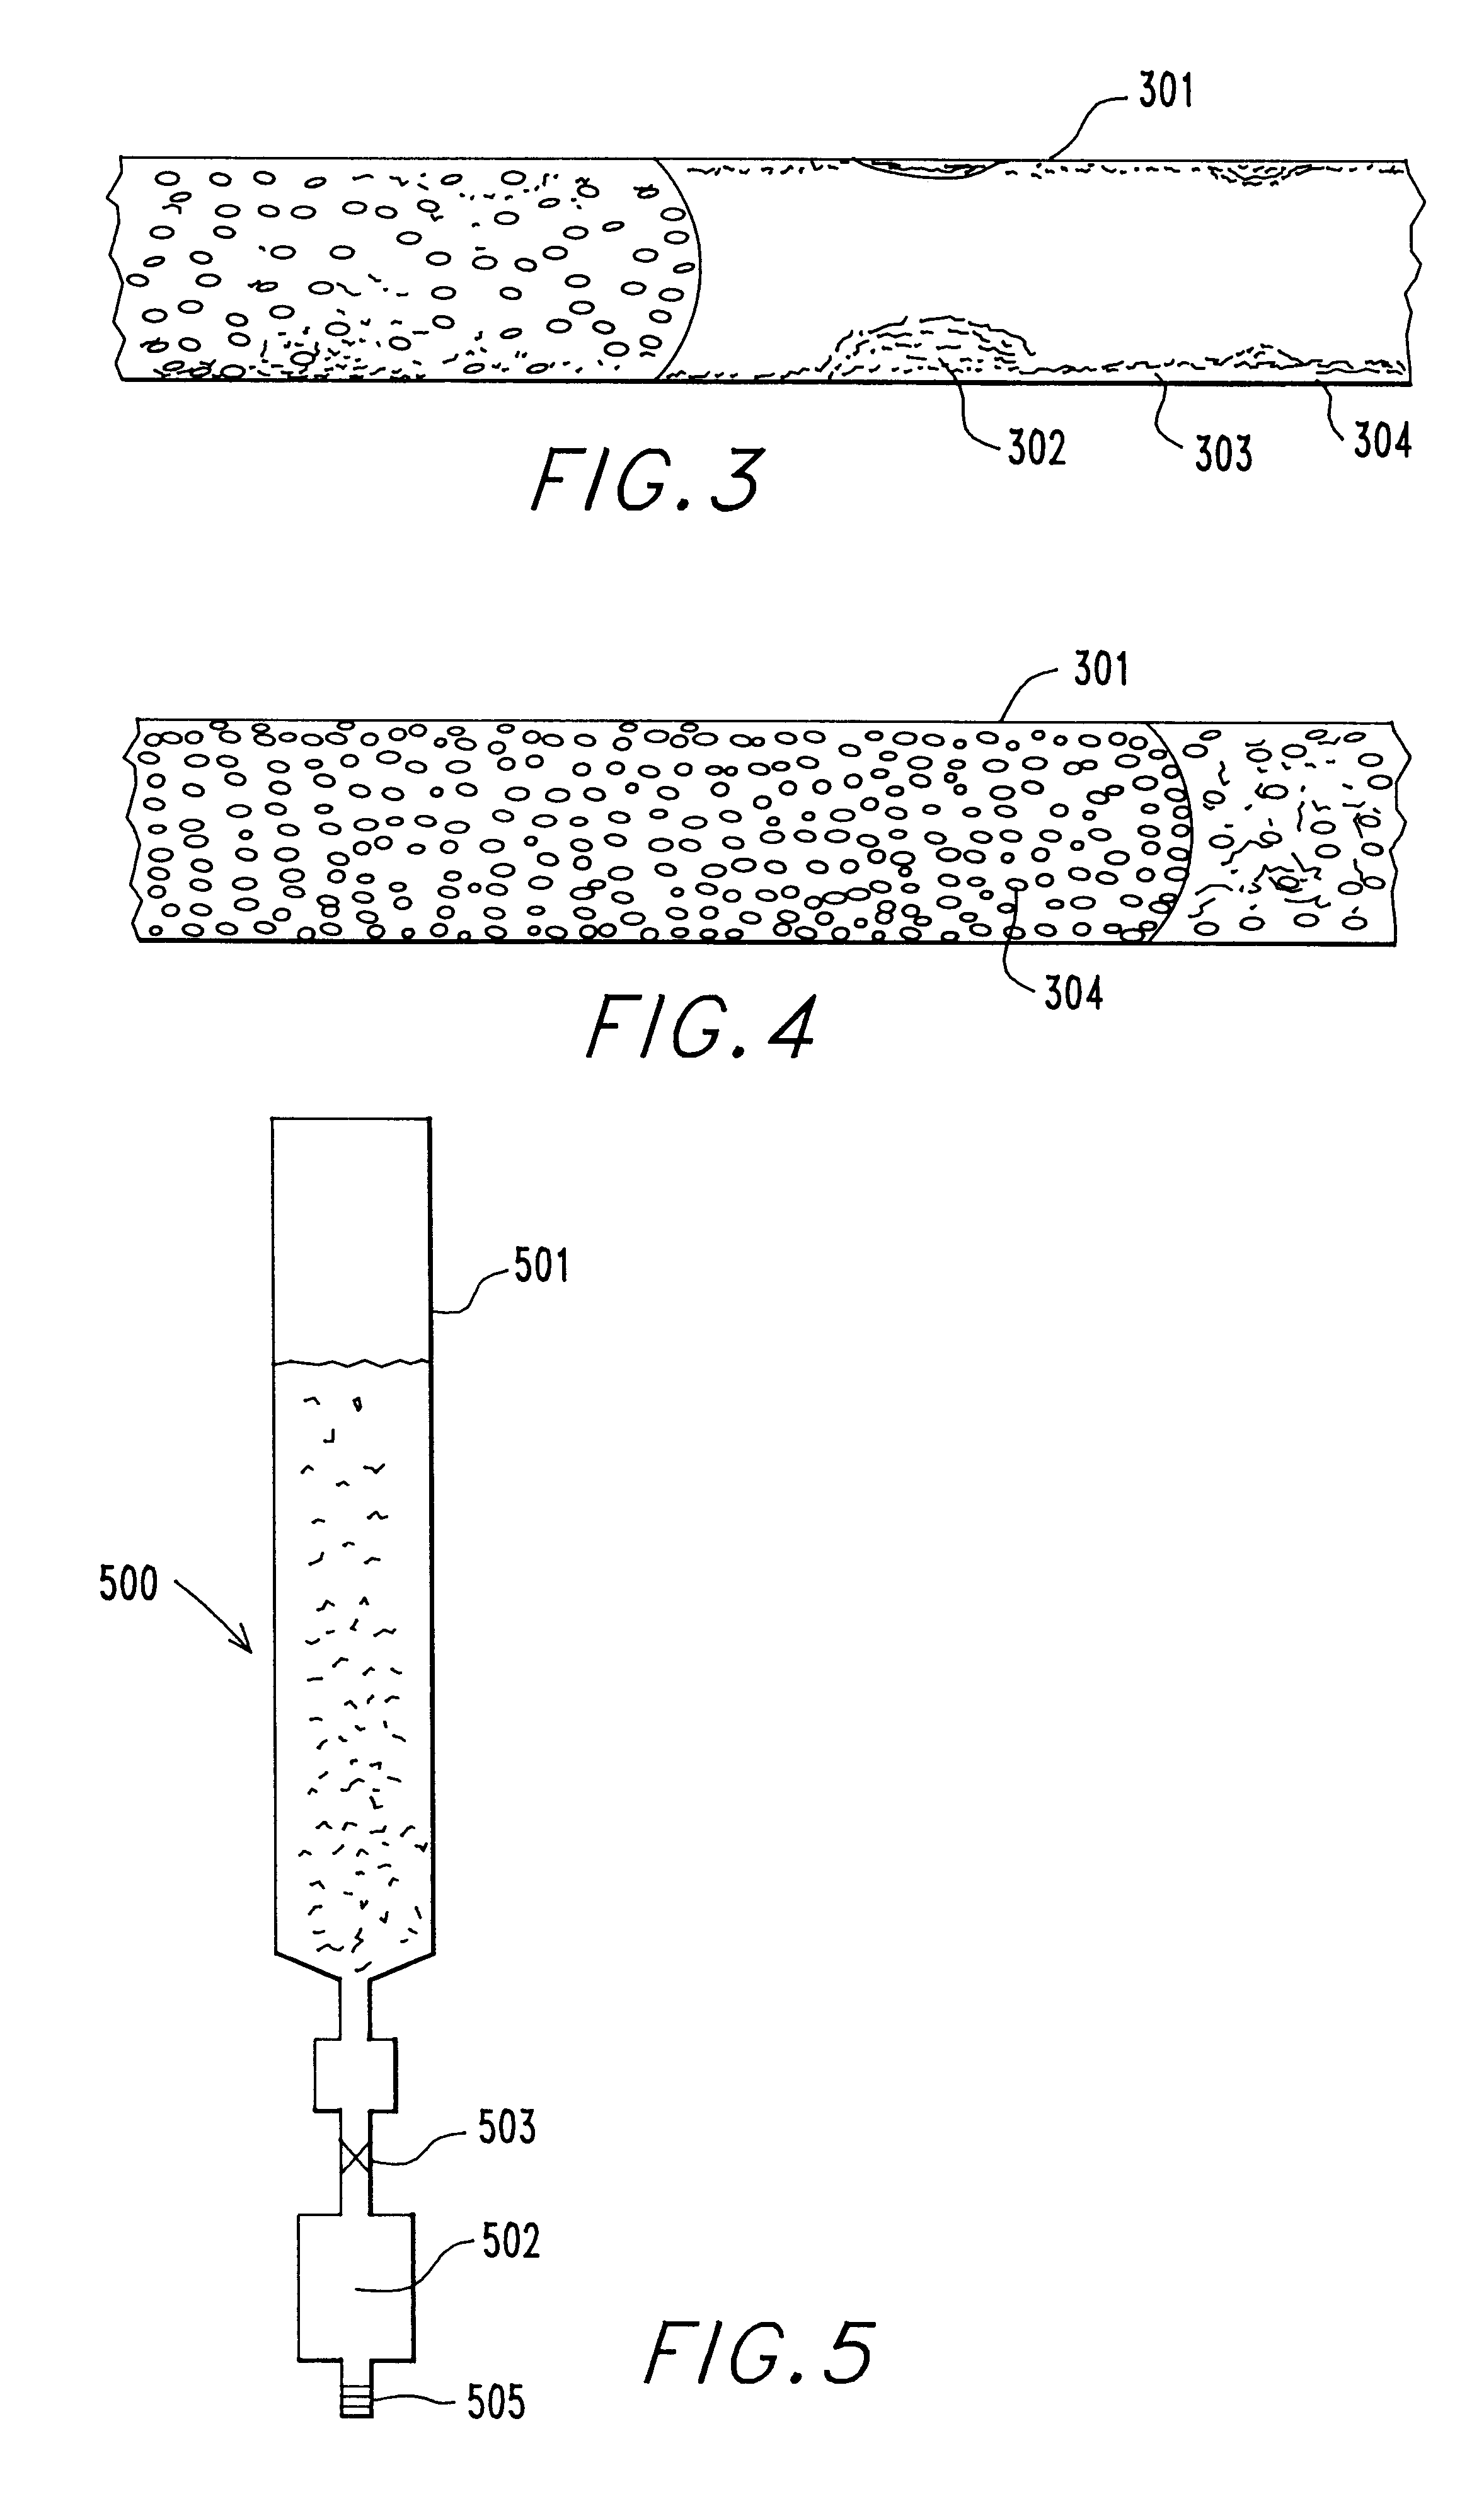 Method and apparatus to clean and apply foamed corrosion inhibitor to ferrous surfaces